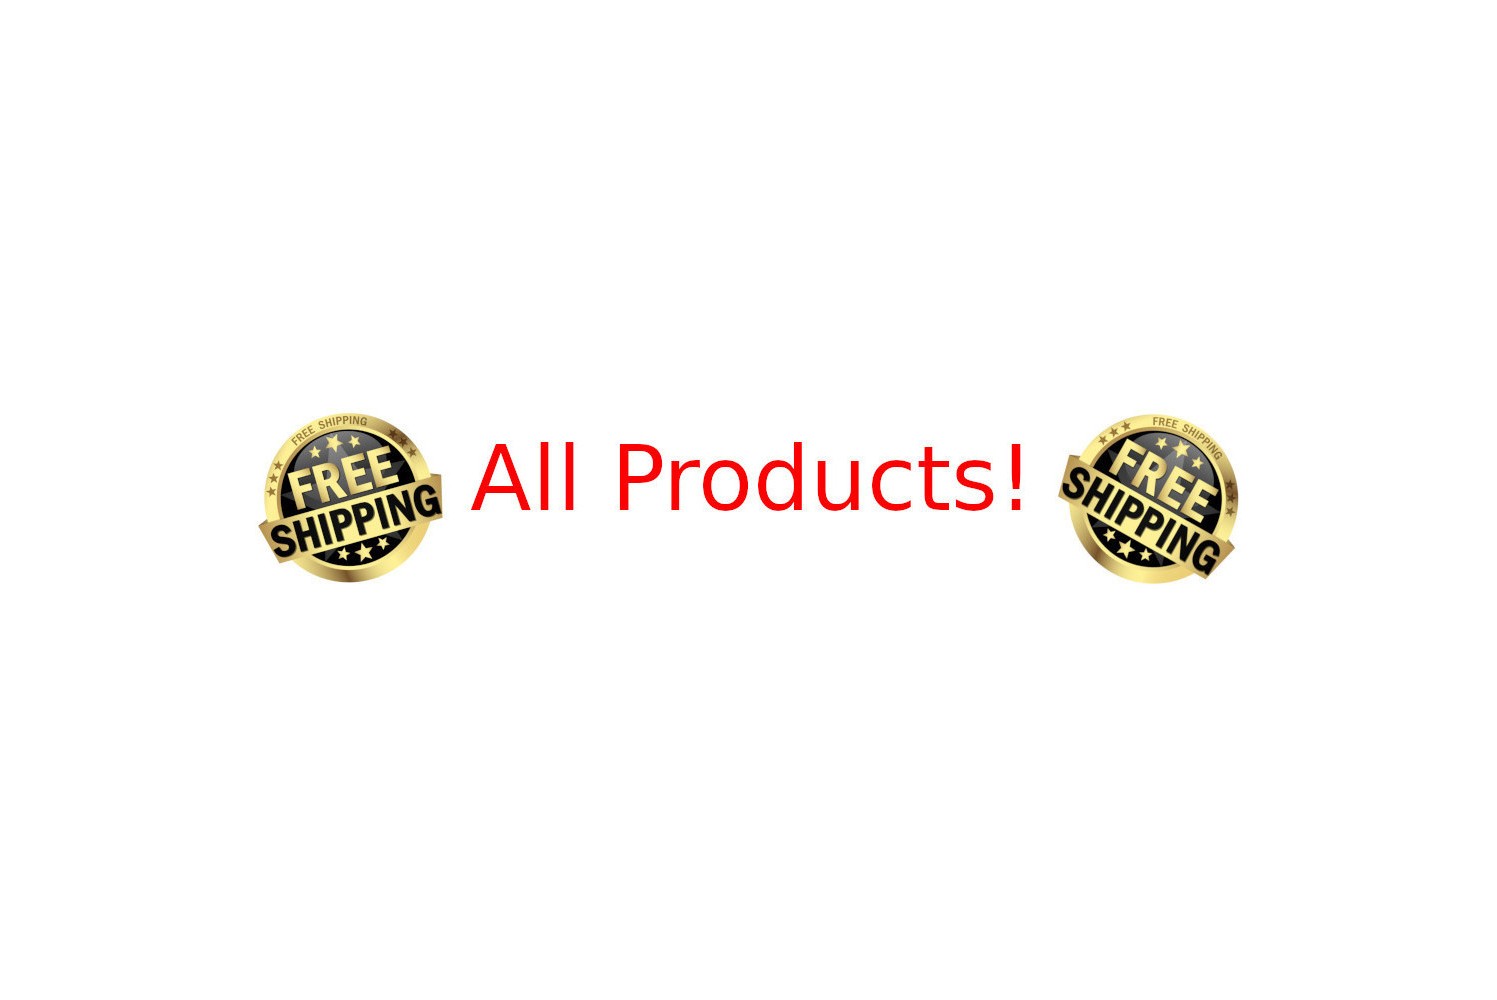 All Products Free Shipping